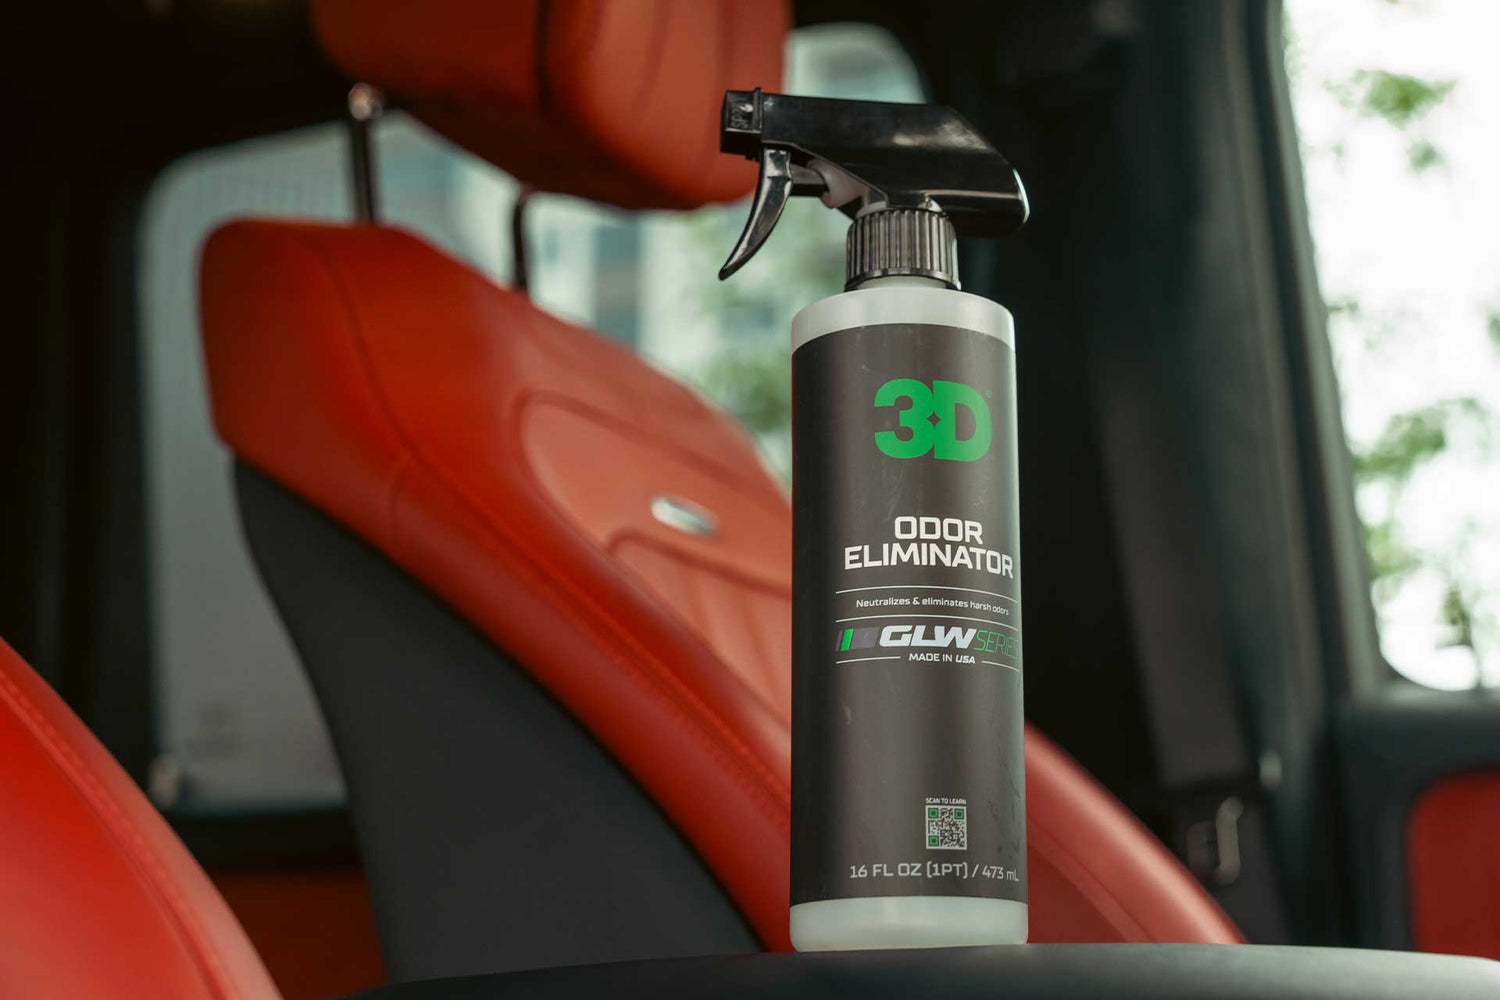 bottle of odor eliminator in front of red leather car seats